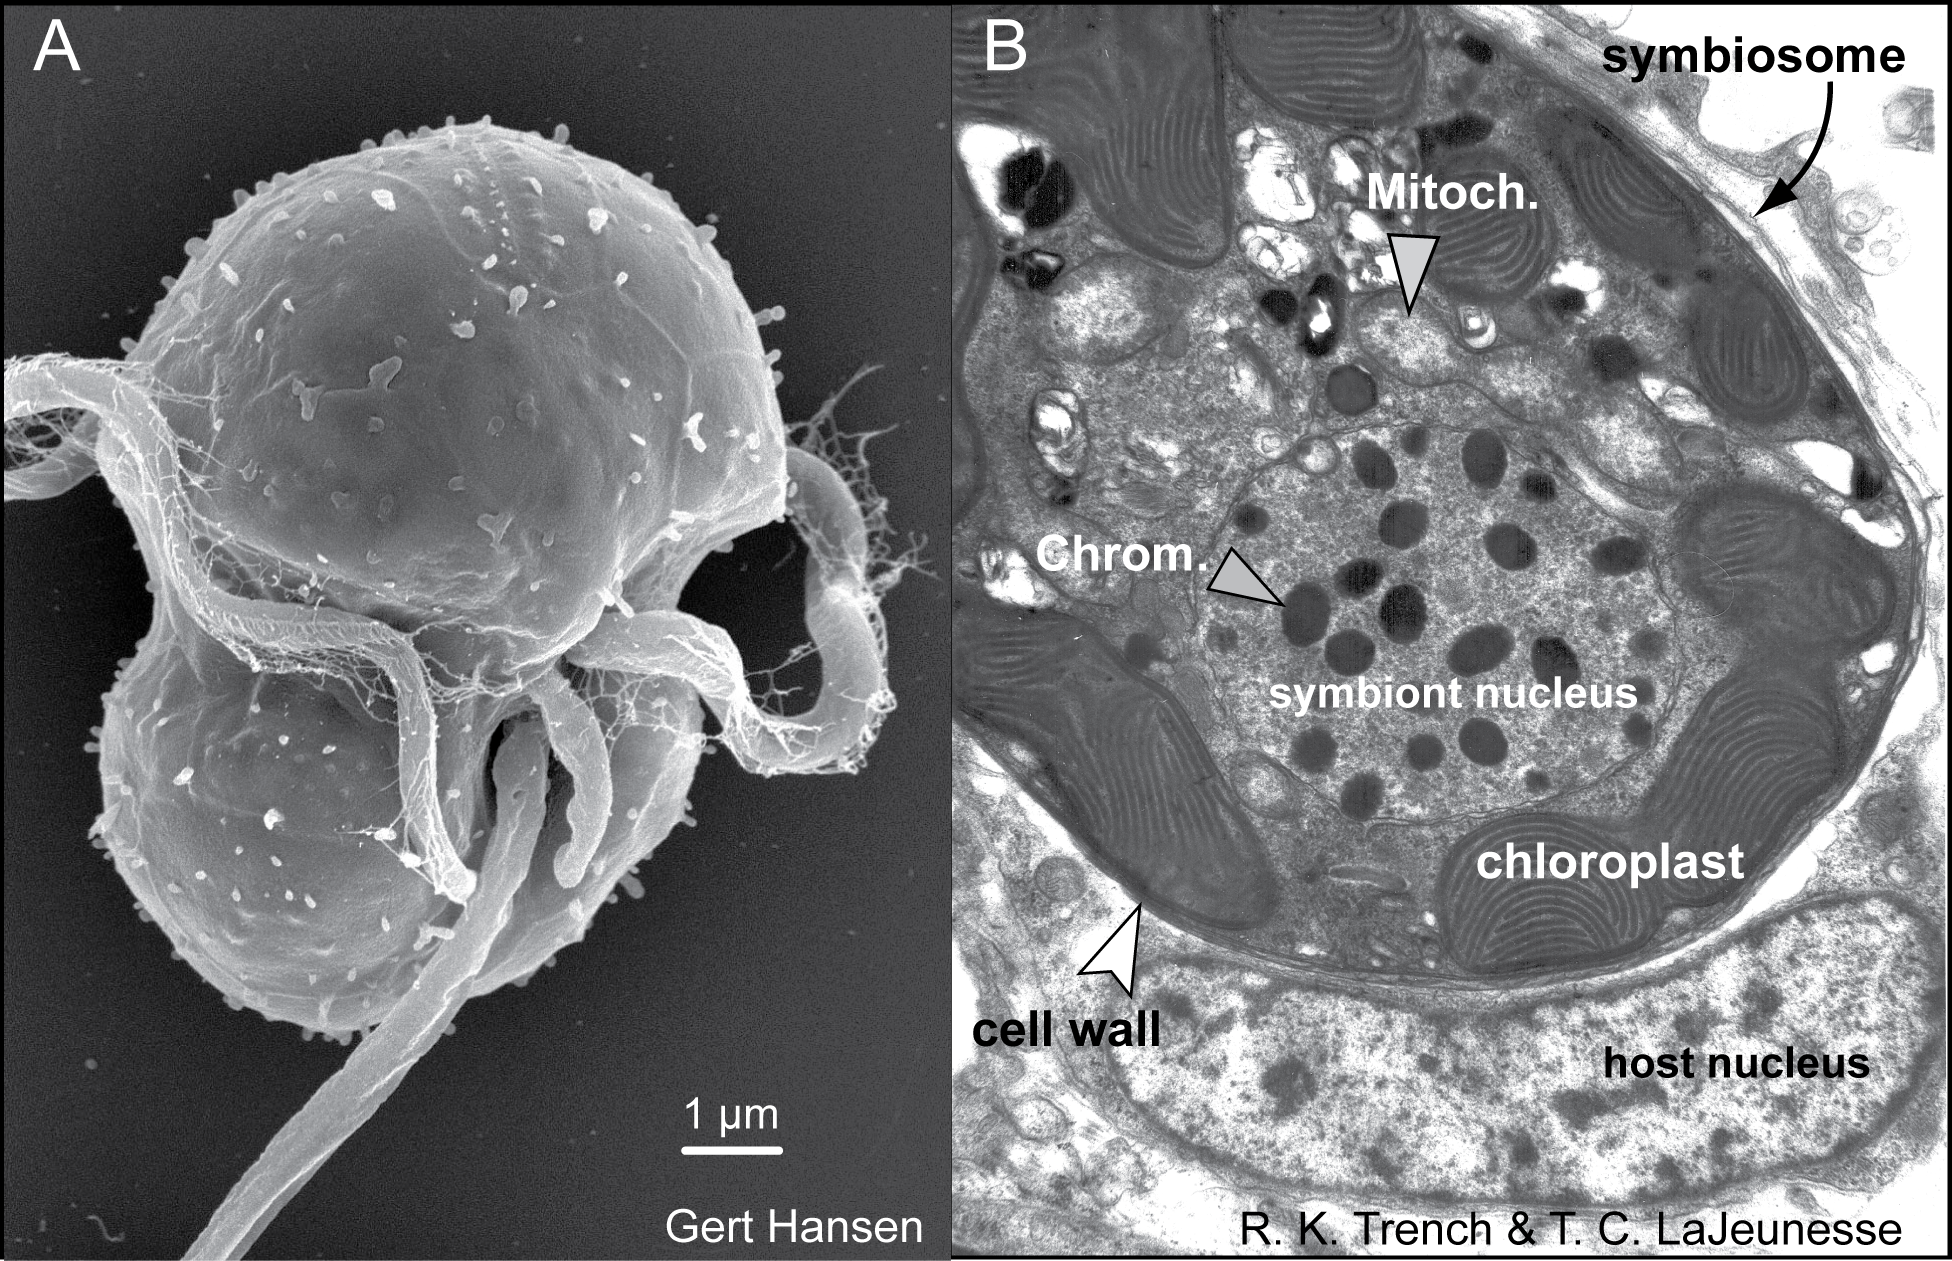 (A) Electron micrographs of a Symbiodinium mastigote (motile cell)
with characteristic gymnodinioid morphology and (B) the coccoid
cell in hospitæ. Image and caption from Wikipedia under CC BY-SA 4.0 by Dr. Alison Lewis